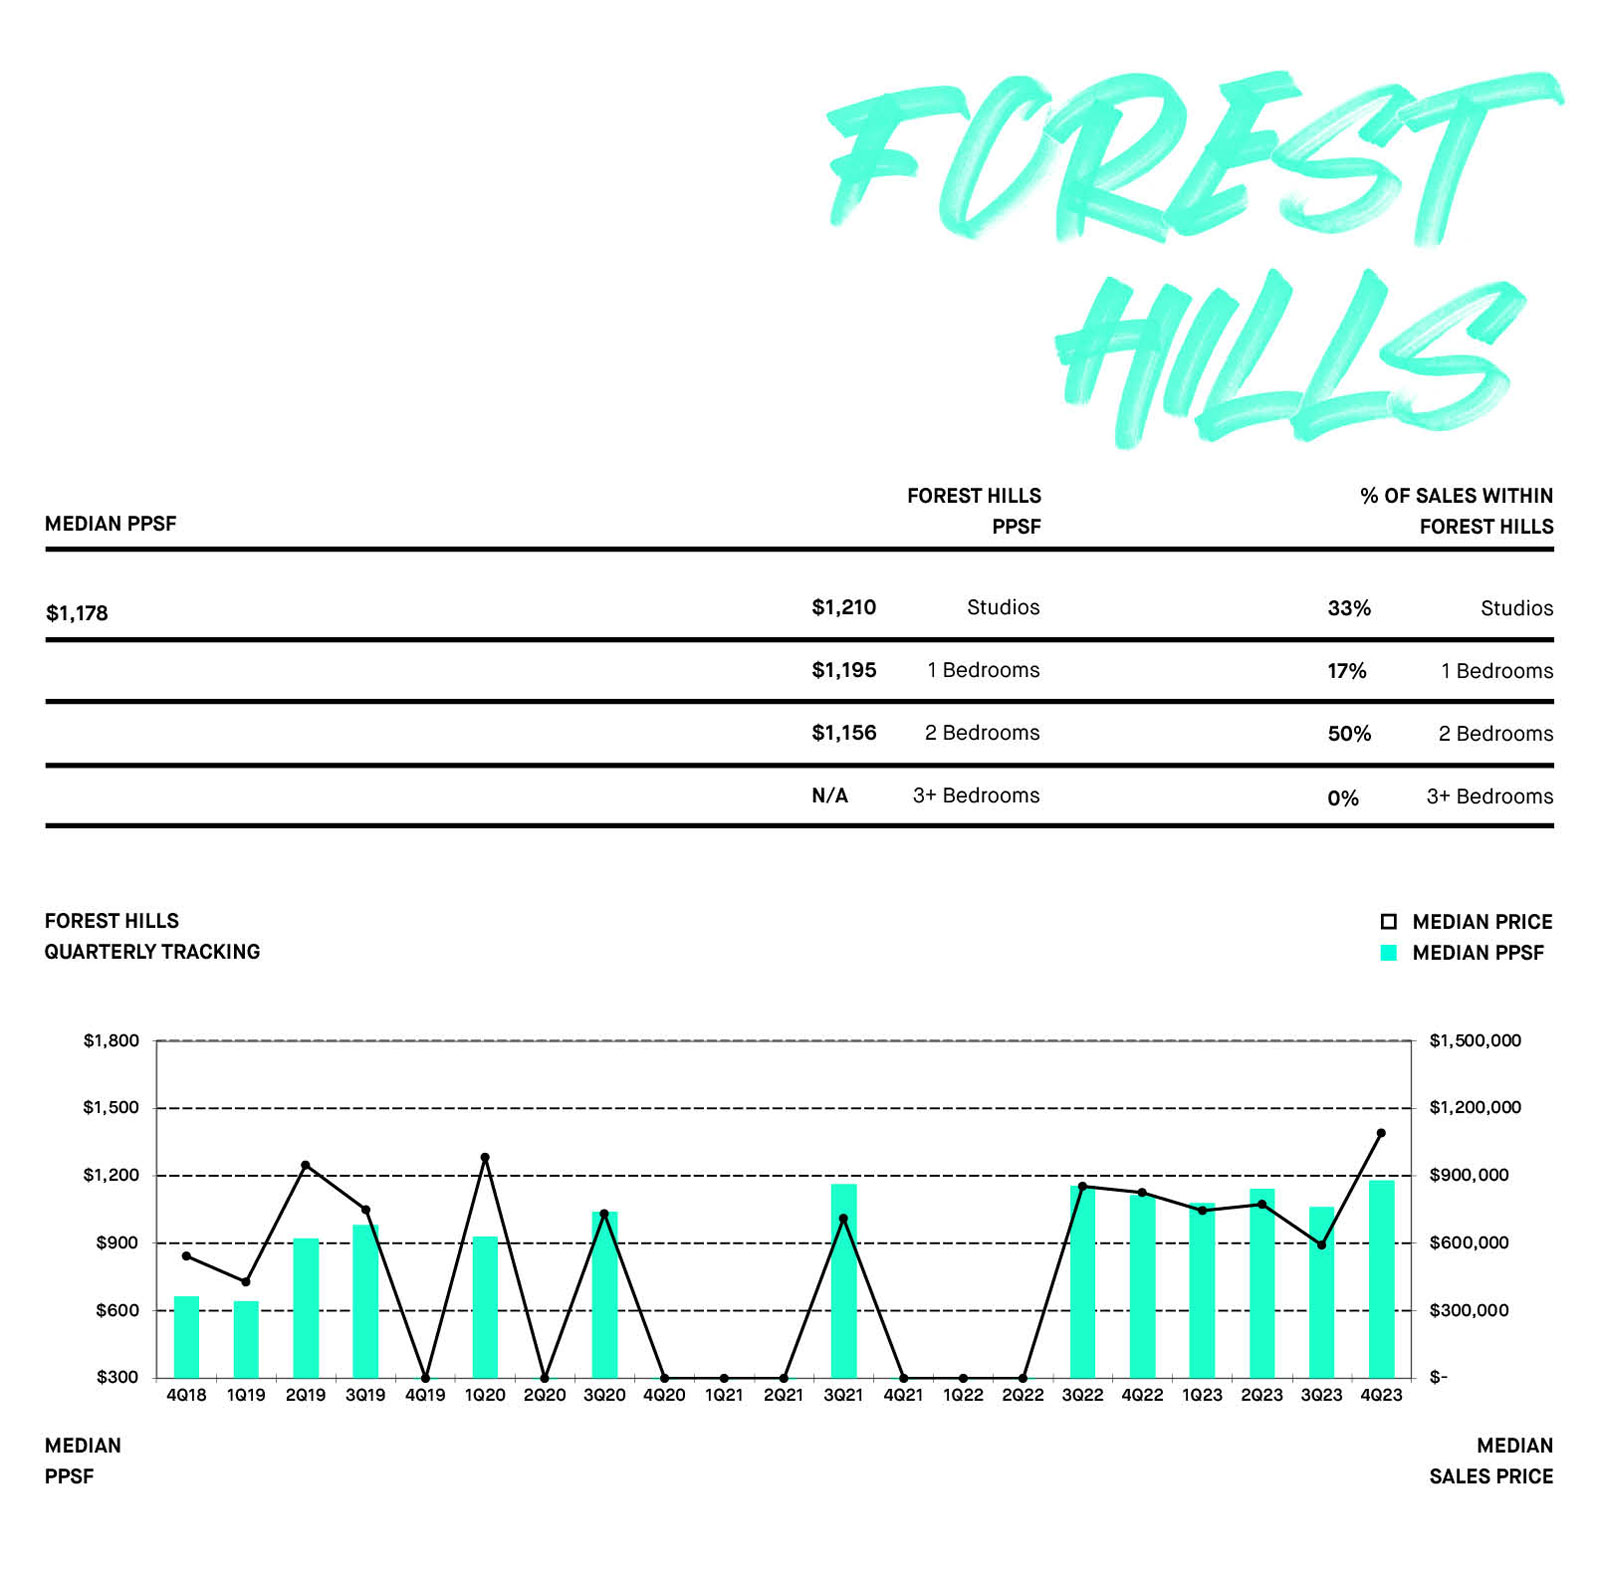 FOREST HILLS